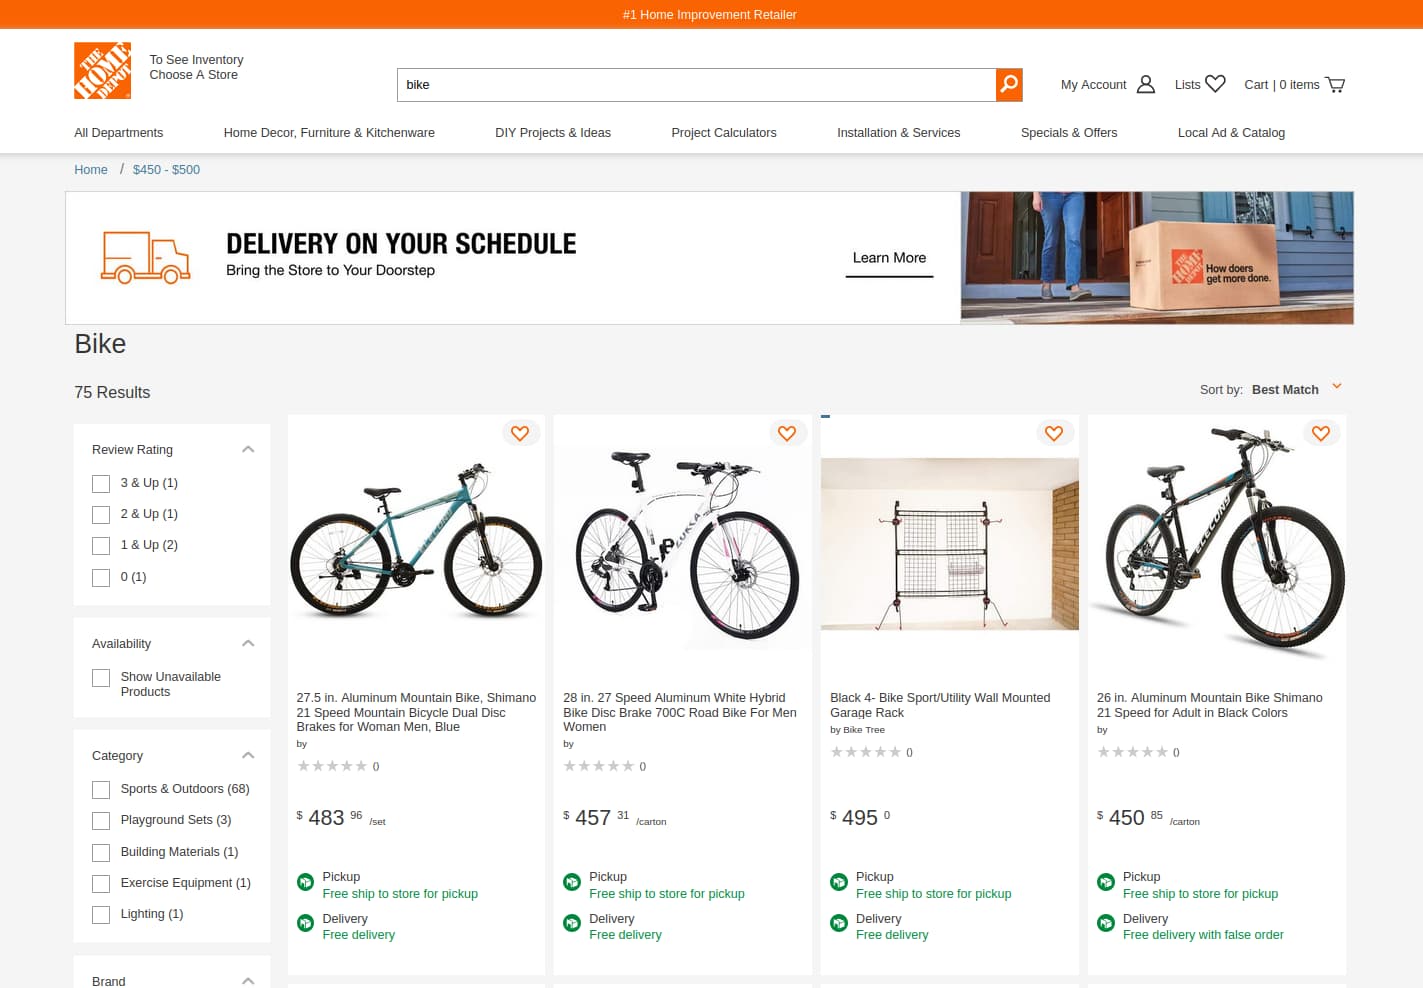 Example results for q: Bike, lowerbound: 450 and upperbound: 500 (the Home Depot US)